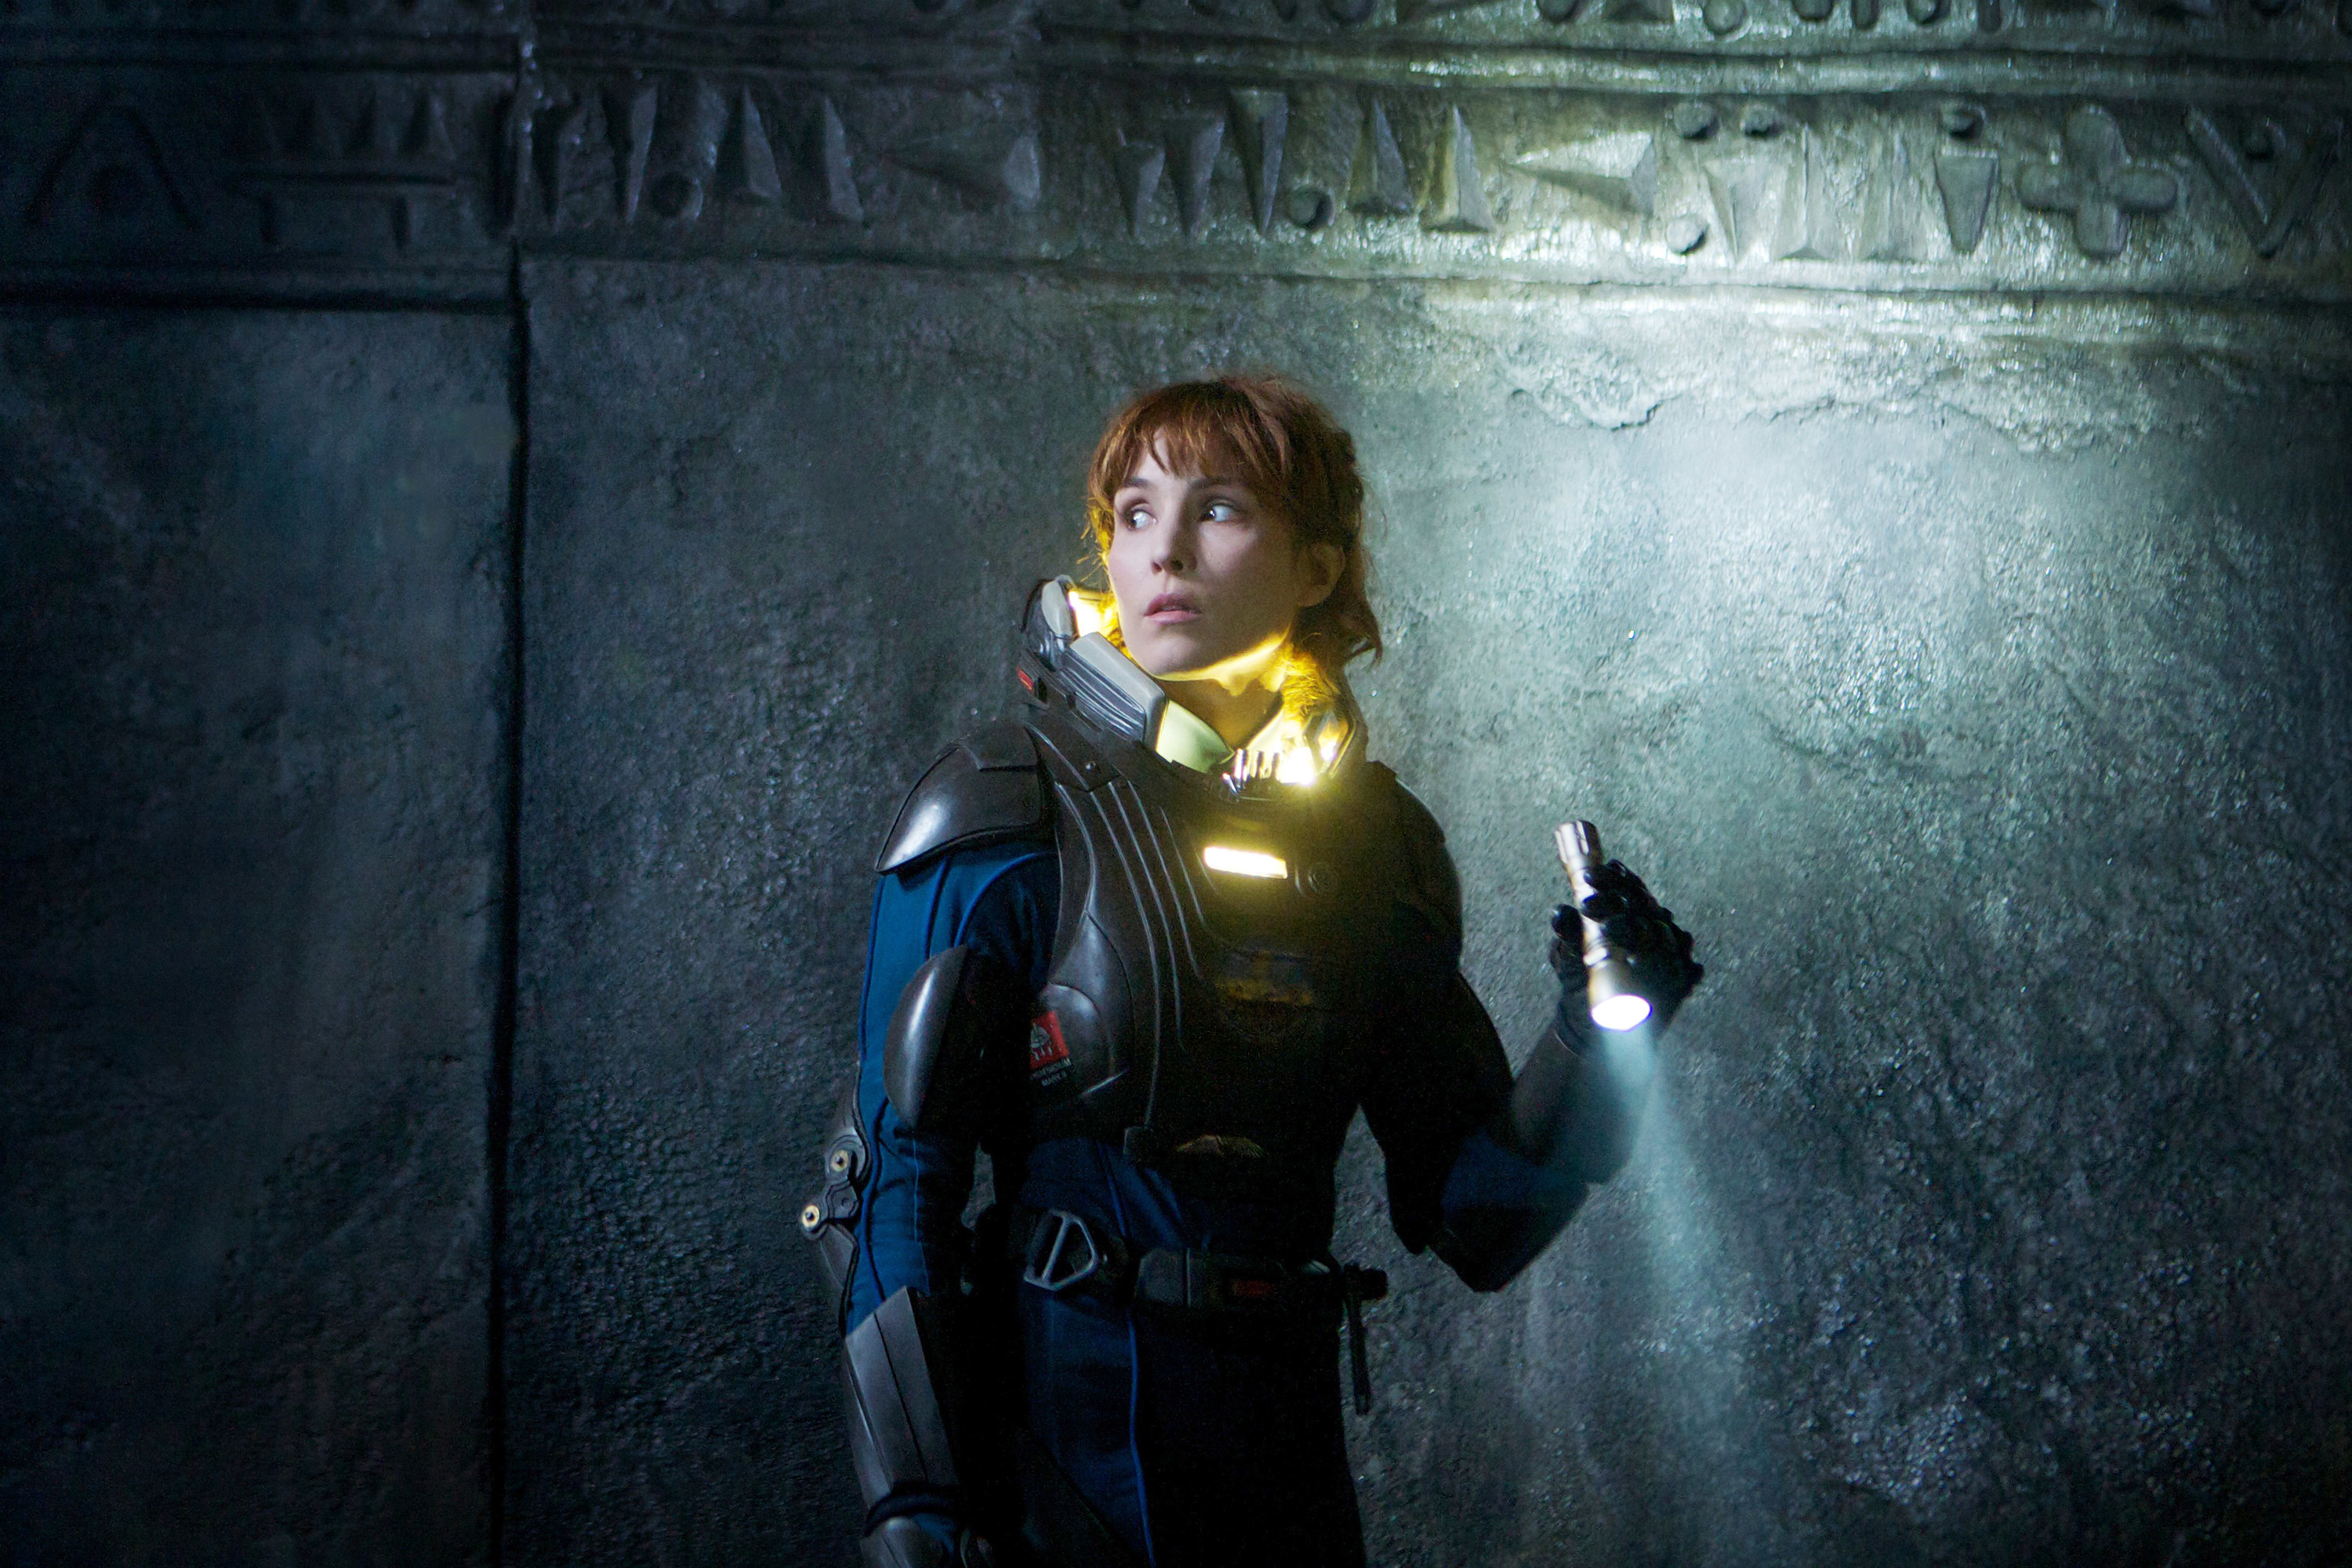 Noomi Rapace wears an astronaut suit and carries a flashlight